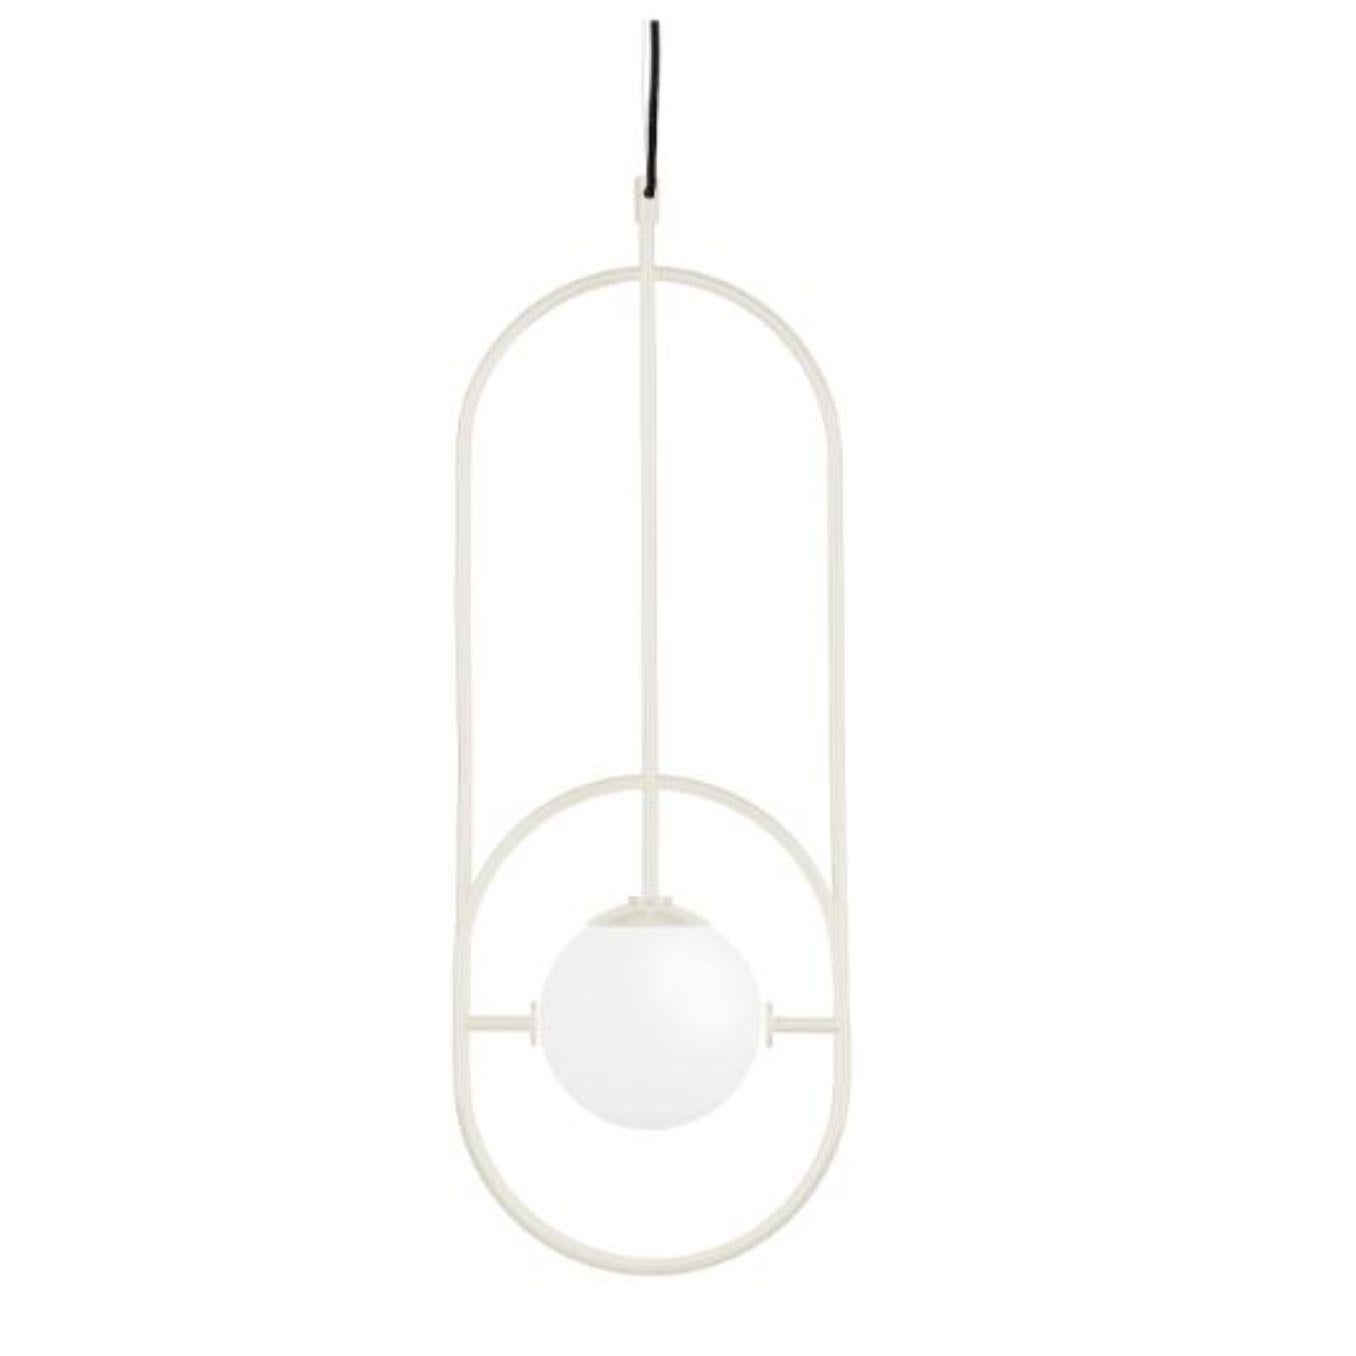 Ivory loop I suspension lamp by Dooq
Dimensions: W 26.5 x D 15 x H 73 cm
Materials: lacquered metal, polished or brushed metal.
Also available in different colours and materials.

Information:
230V/50Hz
1 x max. G9
4W LED

120V/60Hz
1 x max. G9
4W